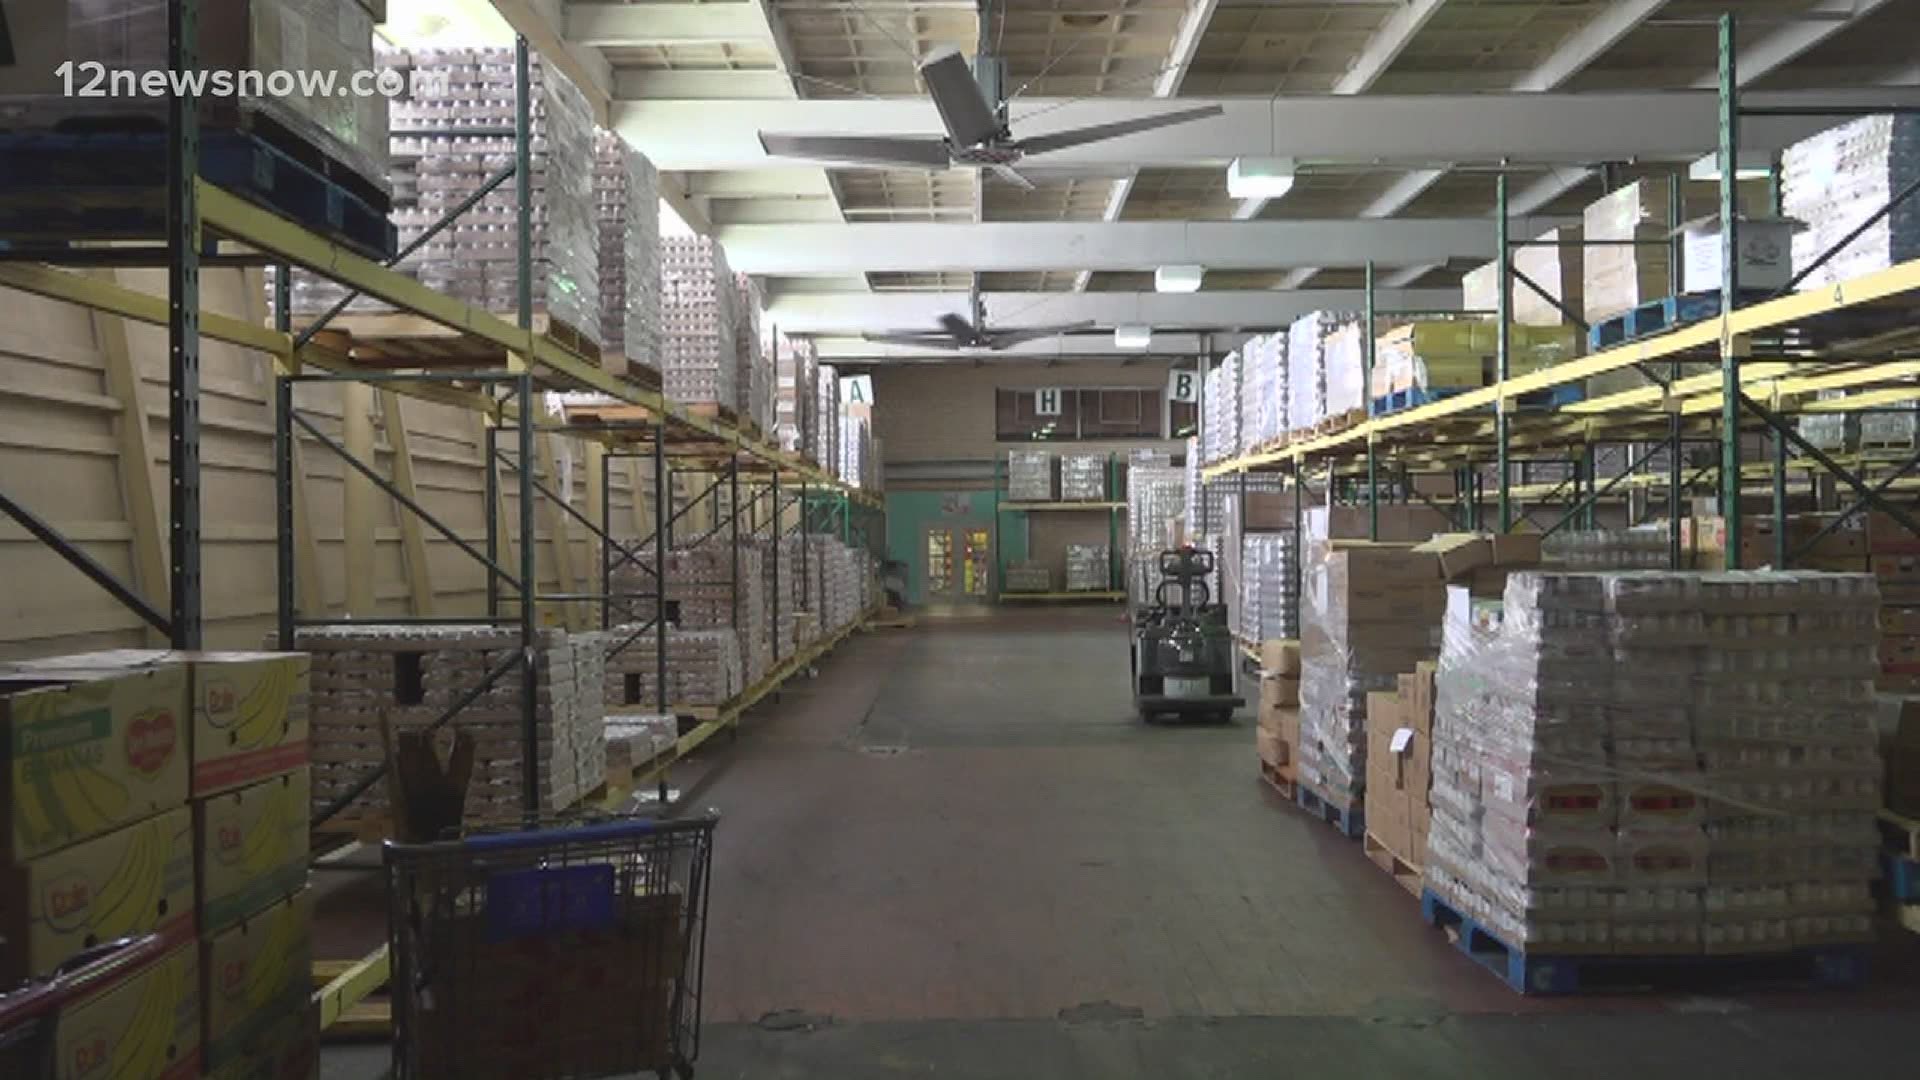 The Southeast Texas Food Bank paused operations after a total of seven staff members are quarantined after testing positive for coronavirus.